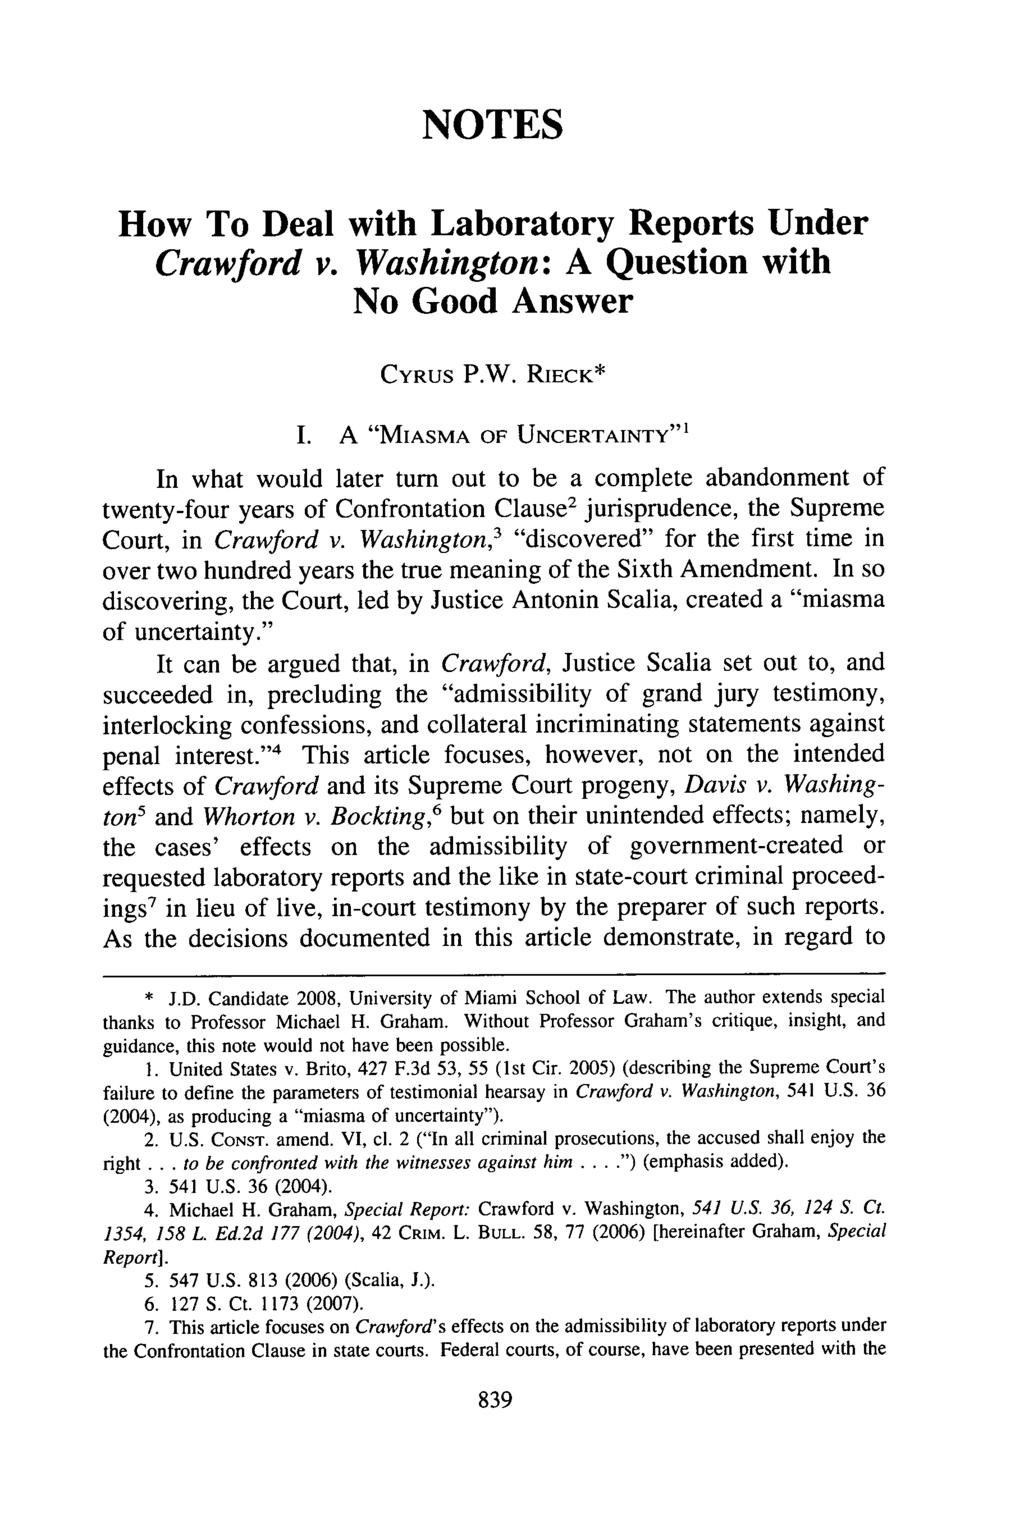 NOTES How To Deal with Laboratory Reports Under Crawford v. Washington: A Question with No Good Answer CYRUS P.W. RIECK* I.